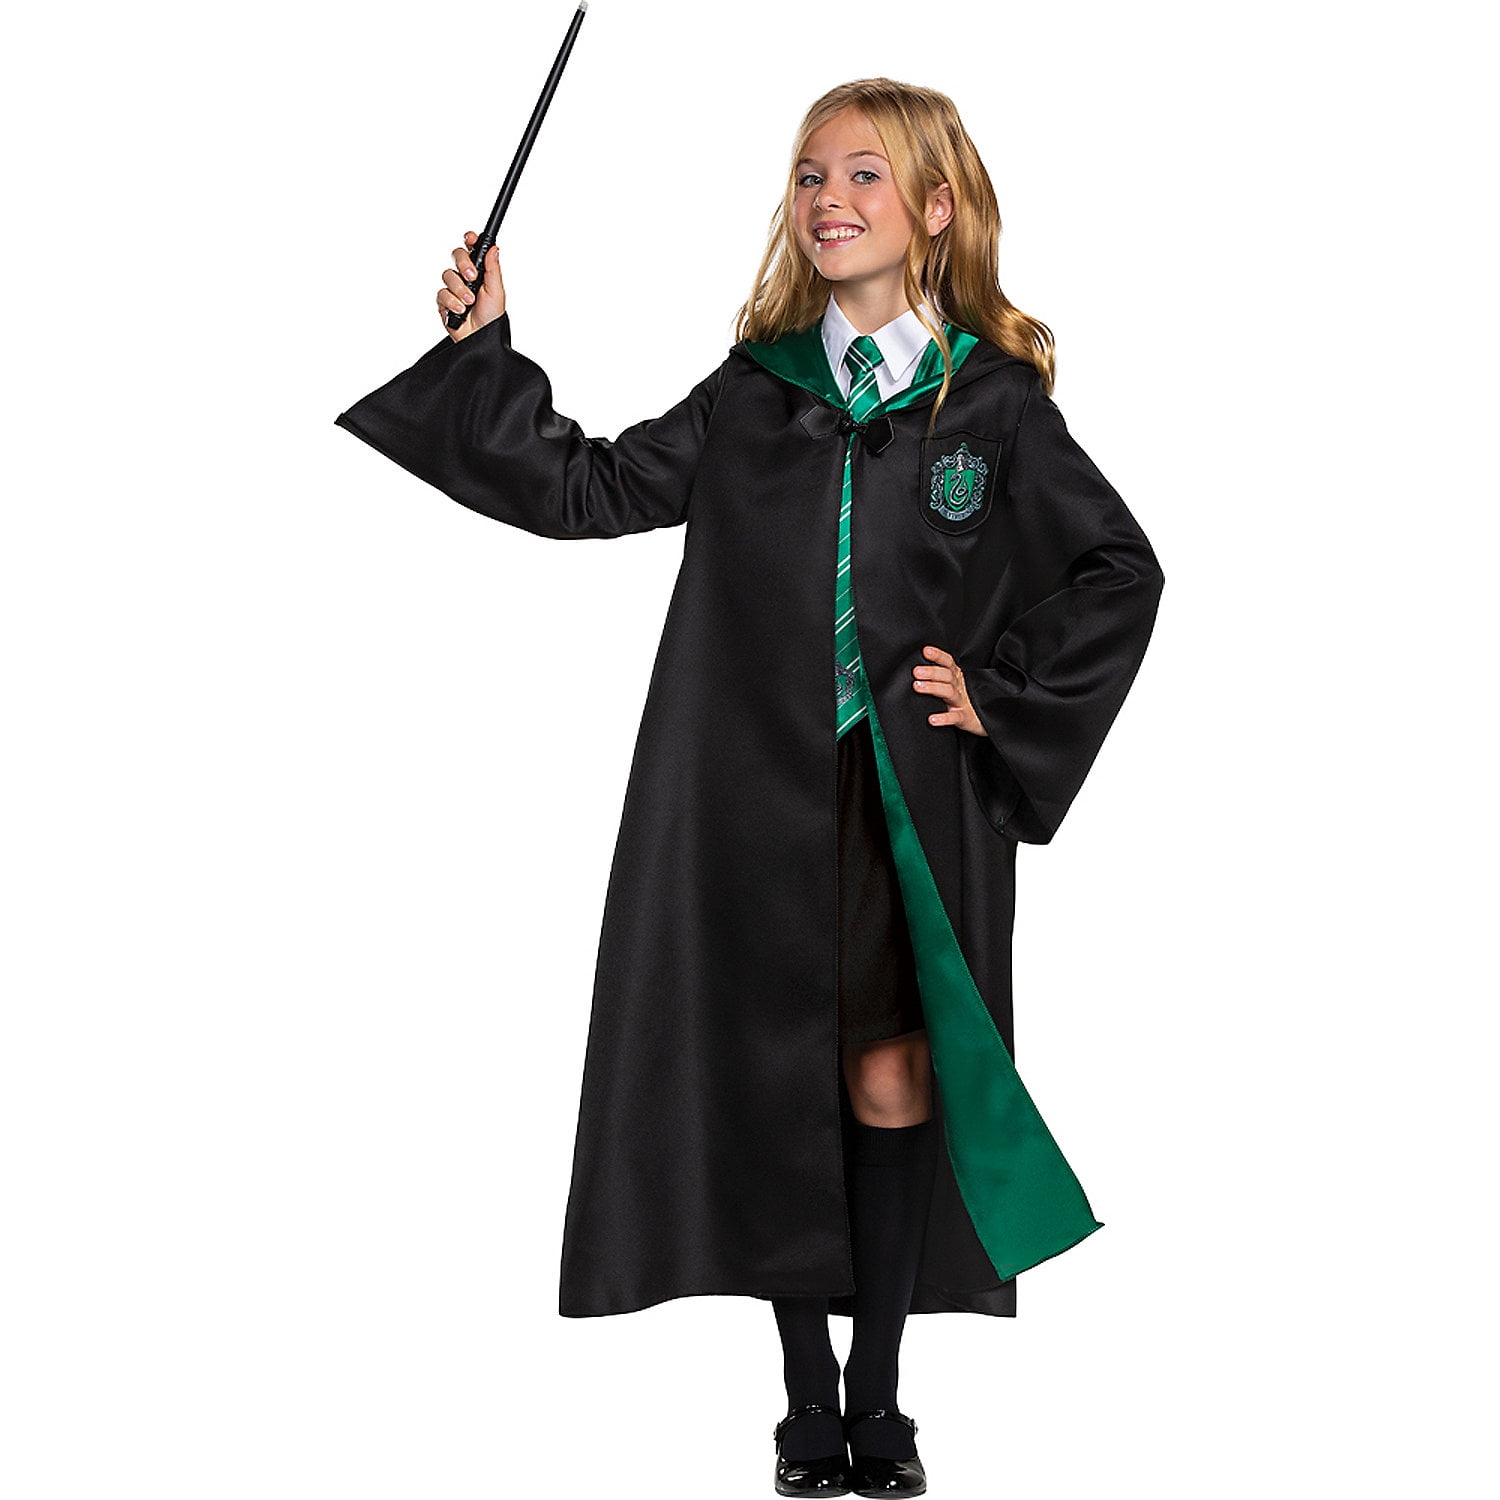 Disguise Kids' Deluxe Harry Potter Slytherin Robe Costume - Size 7-8